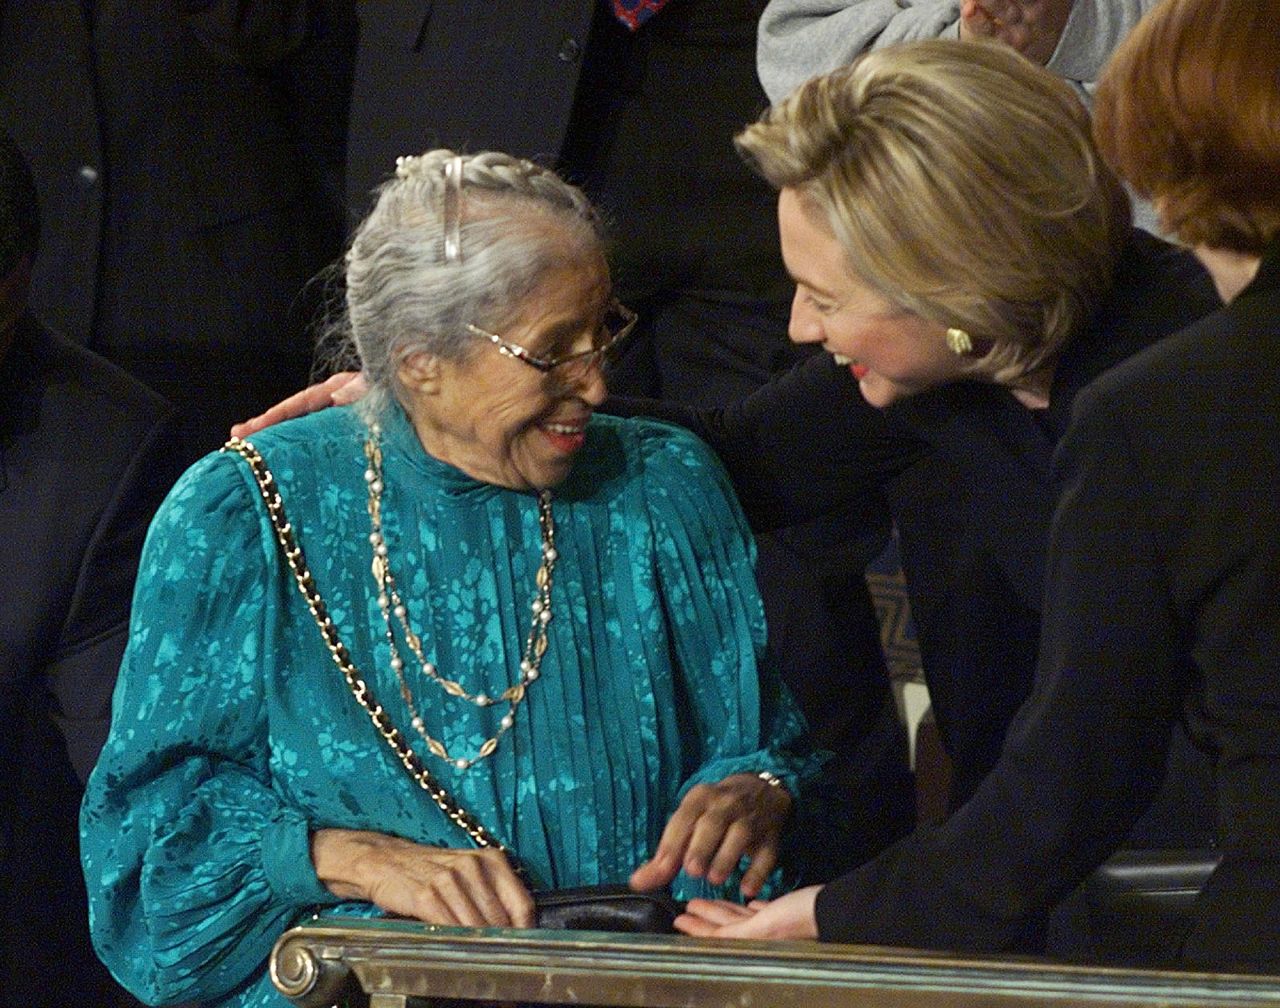 Hillary Clinton greets civil rights pioneer <a href="https://www.cnn.com/2020/12/01/us/rosa-parks-anniversary-2020-trnd/index.html" target="_blank">Rosa Parks</a> during President Clinton's 1999 State of the Union address. 